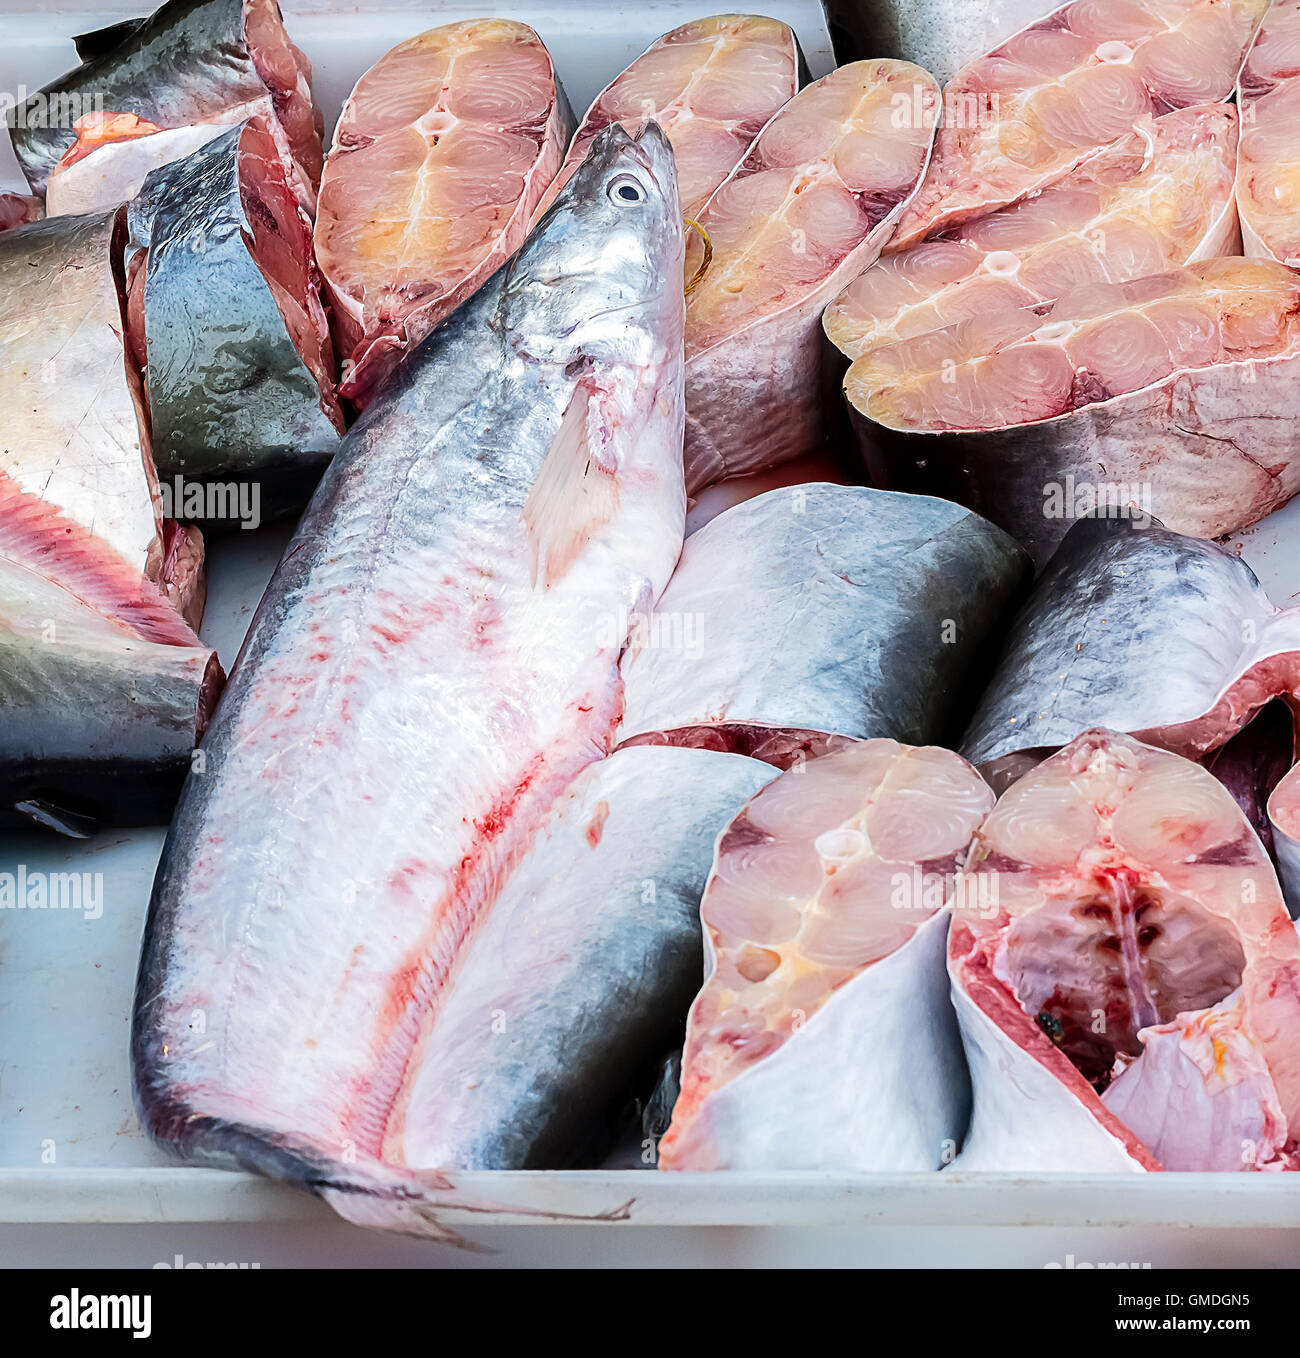 fresh cutted fish at the market Stock Photo